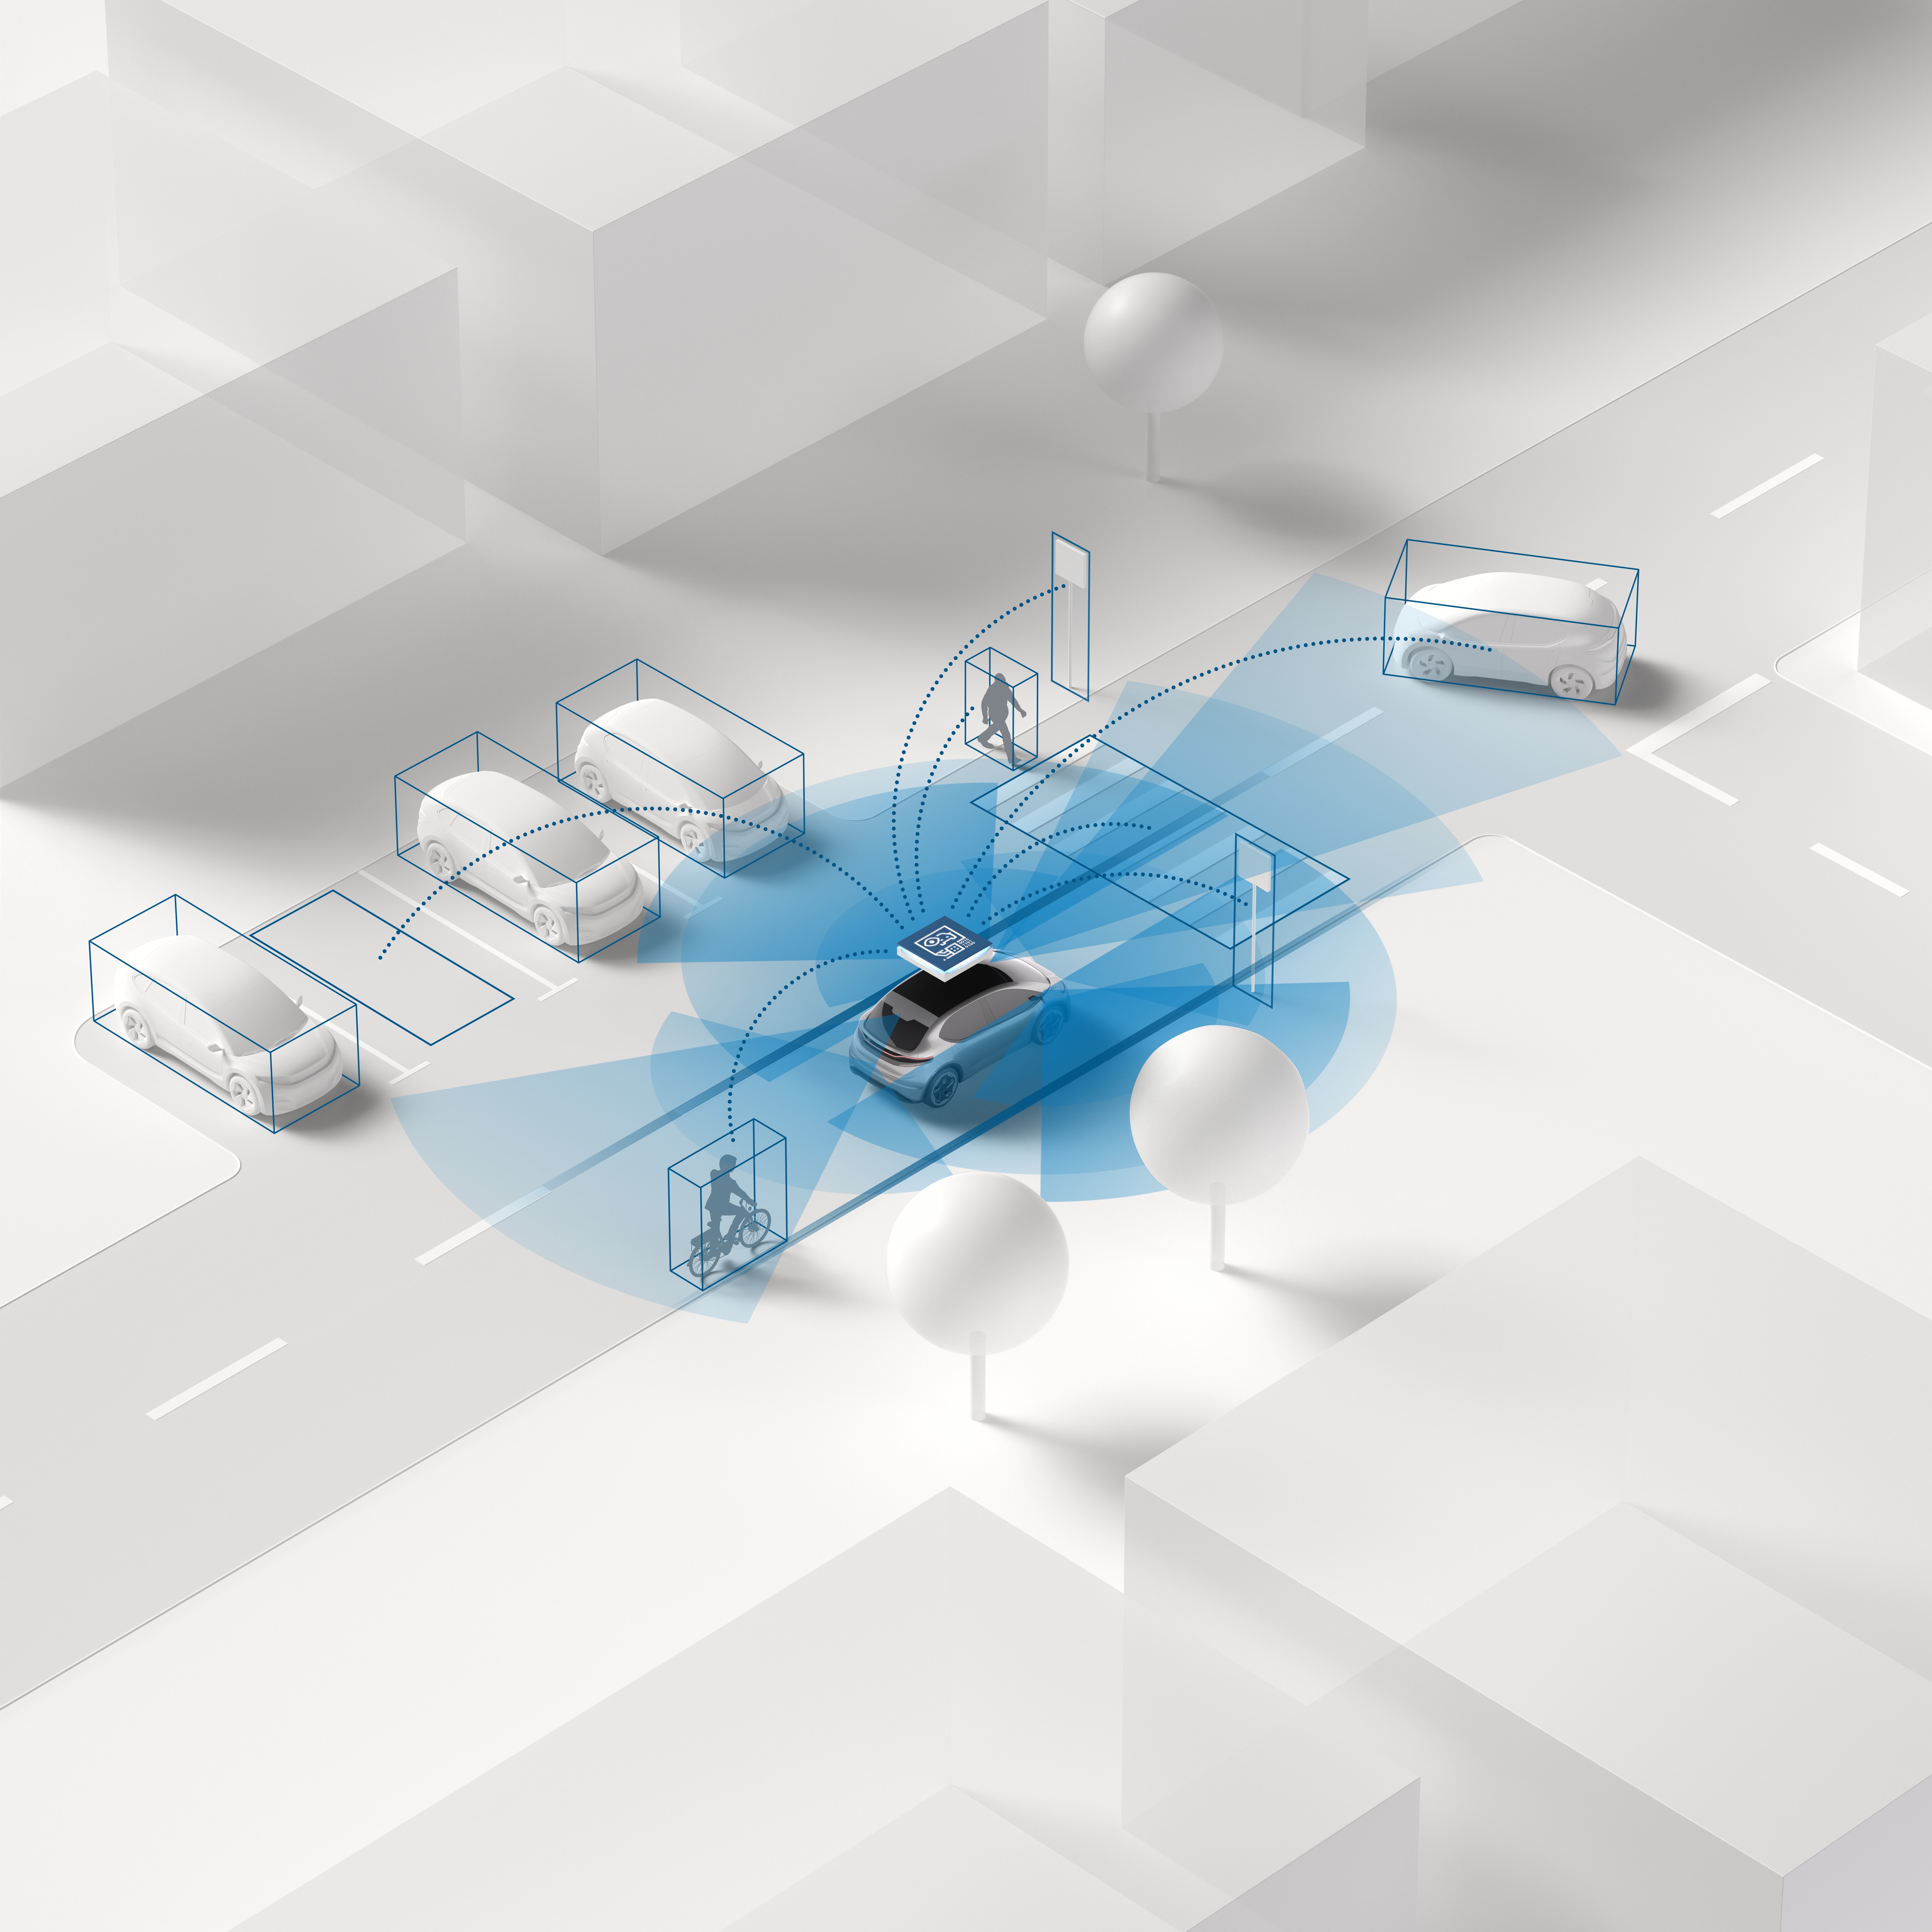 Bosch offers perception for automated driving functions